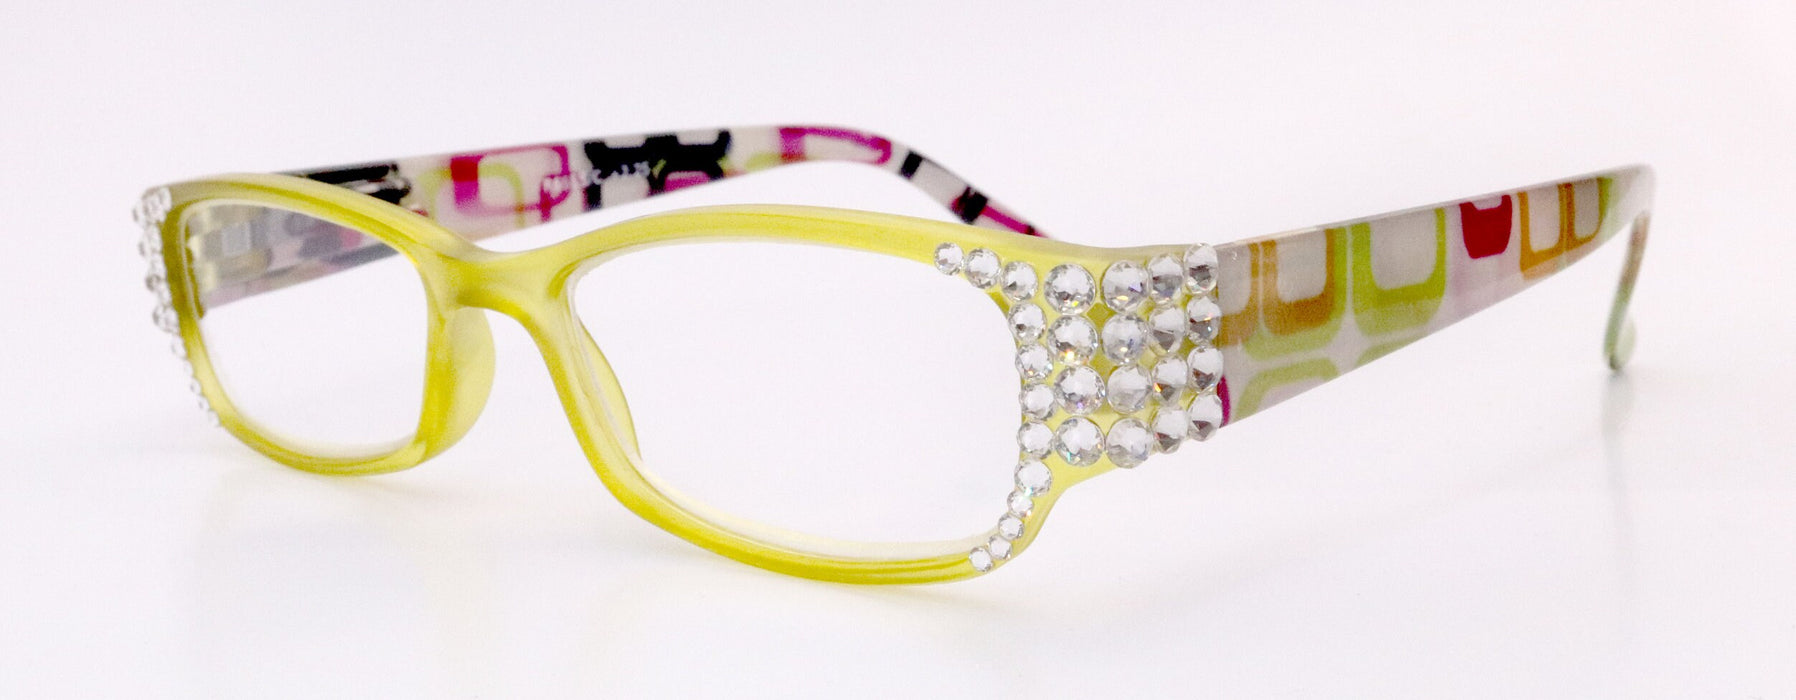 Daisy, (Bling) Reading Glasses for women W Genuine European Clear Crystals +1 .. +3.. +4 NY Fifth Avenue